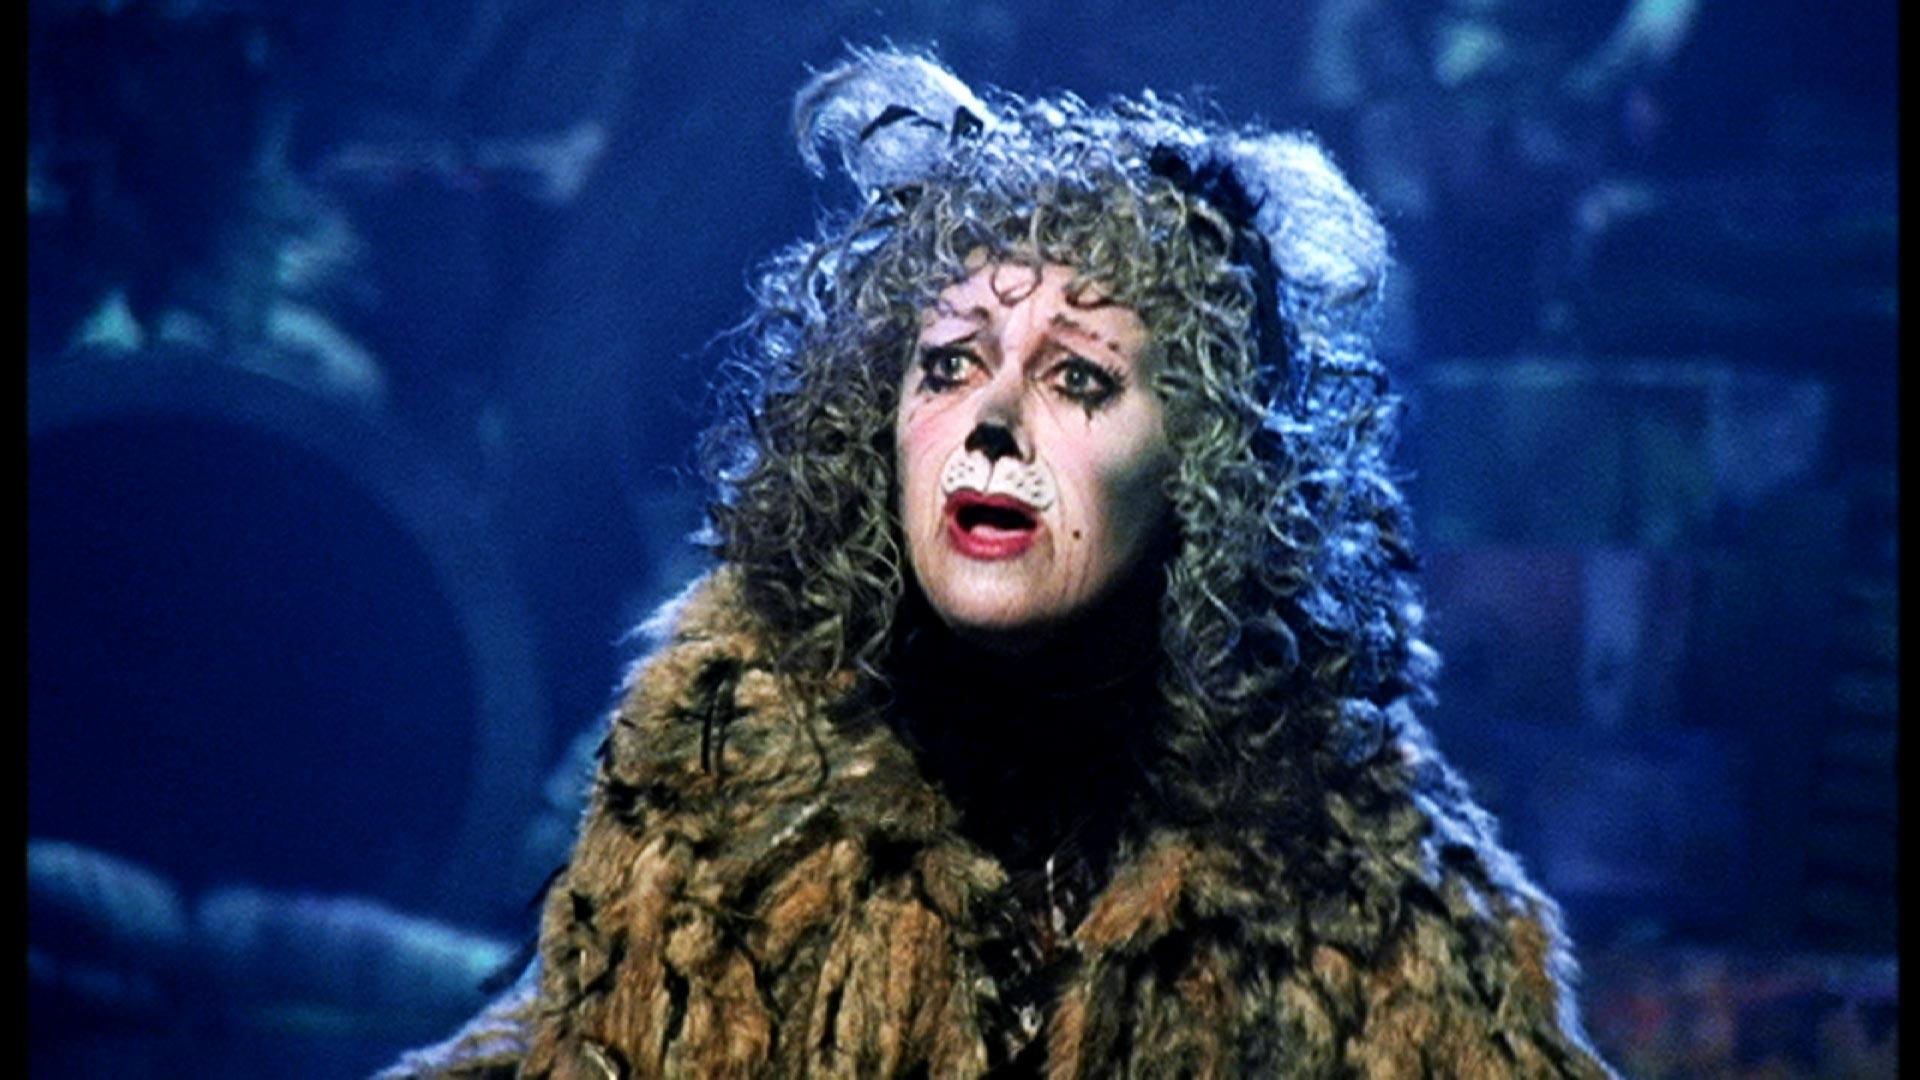 Watch Full Episodes Online of Great Performances on PBS | "Memory" from Cats, the Musical